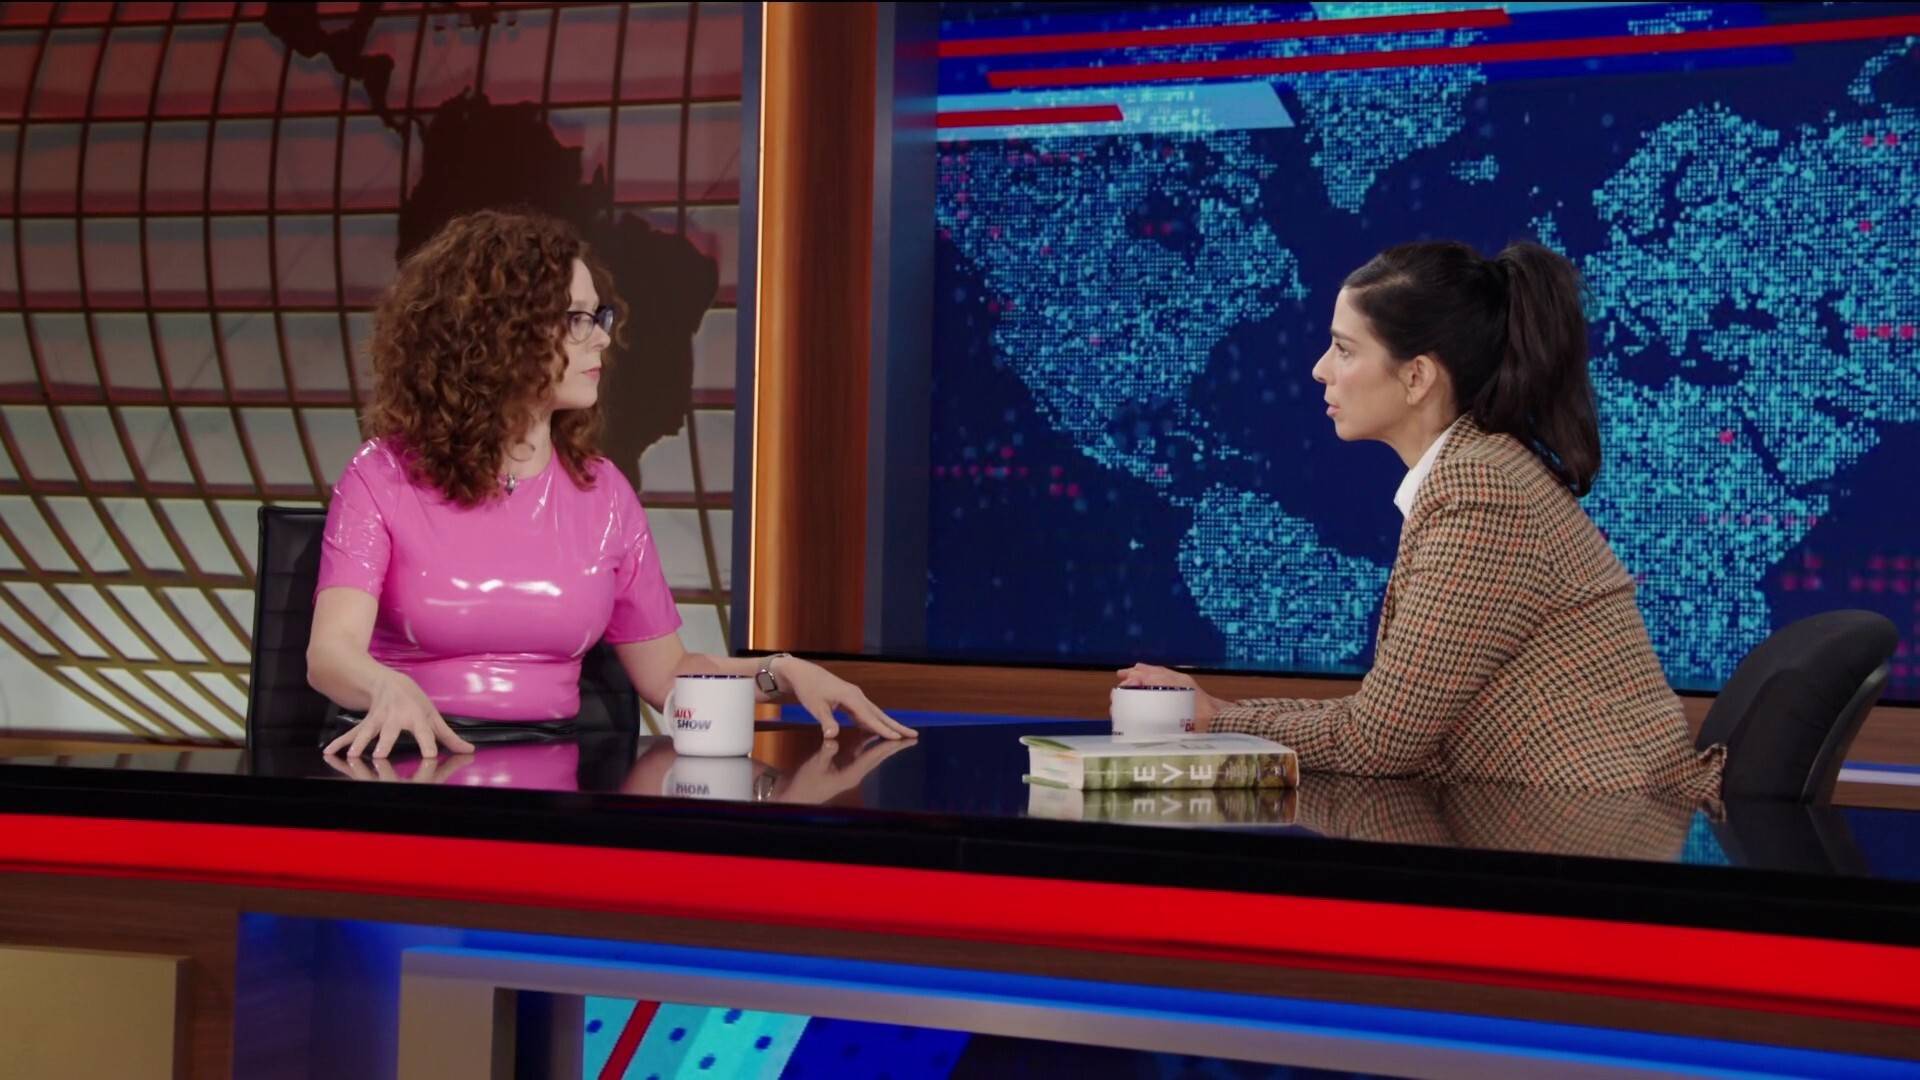 Cat Bohannon - Eve - Extended Interview - The Daily Show (Video Clip)